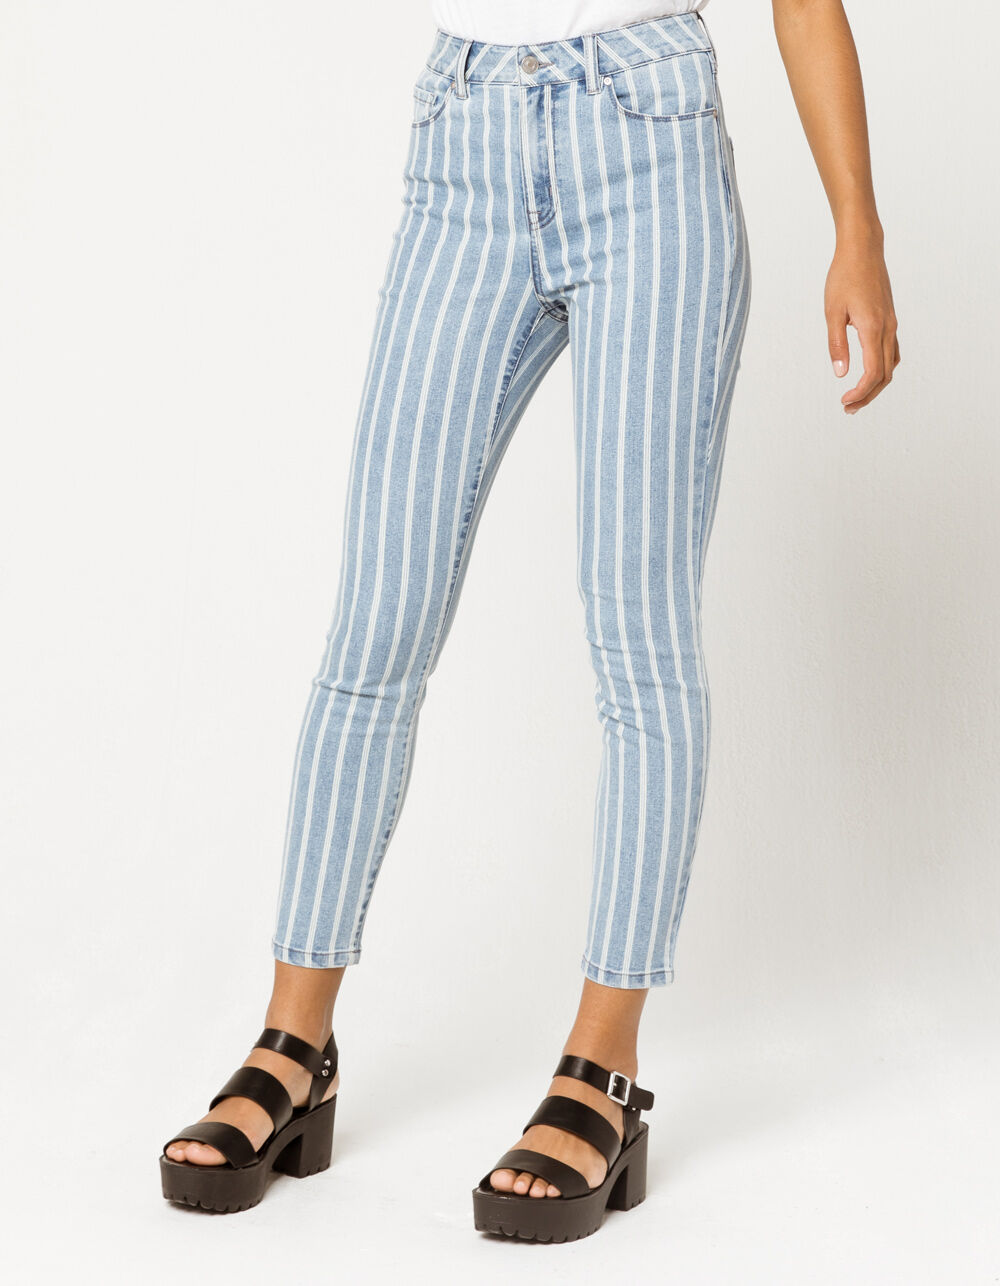 SKY AND SPARROW Stripe Skinny Crop Womens Jeans image number 1